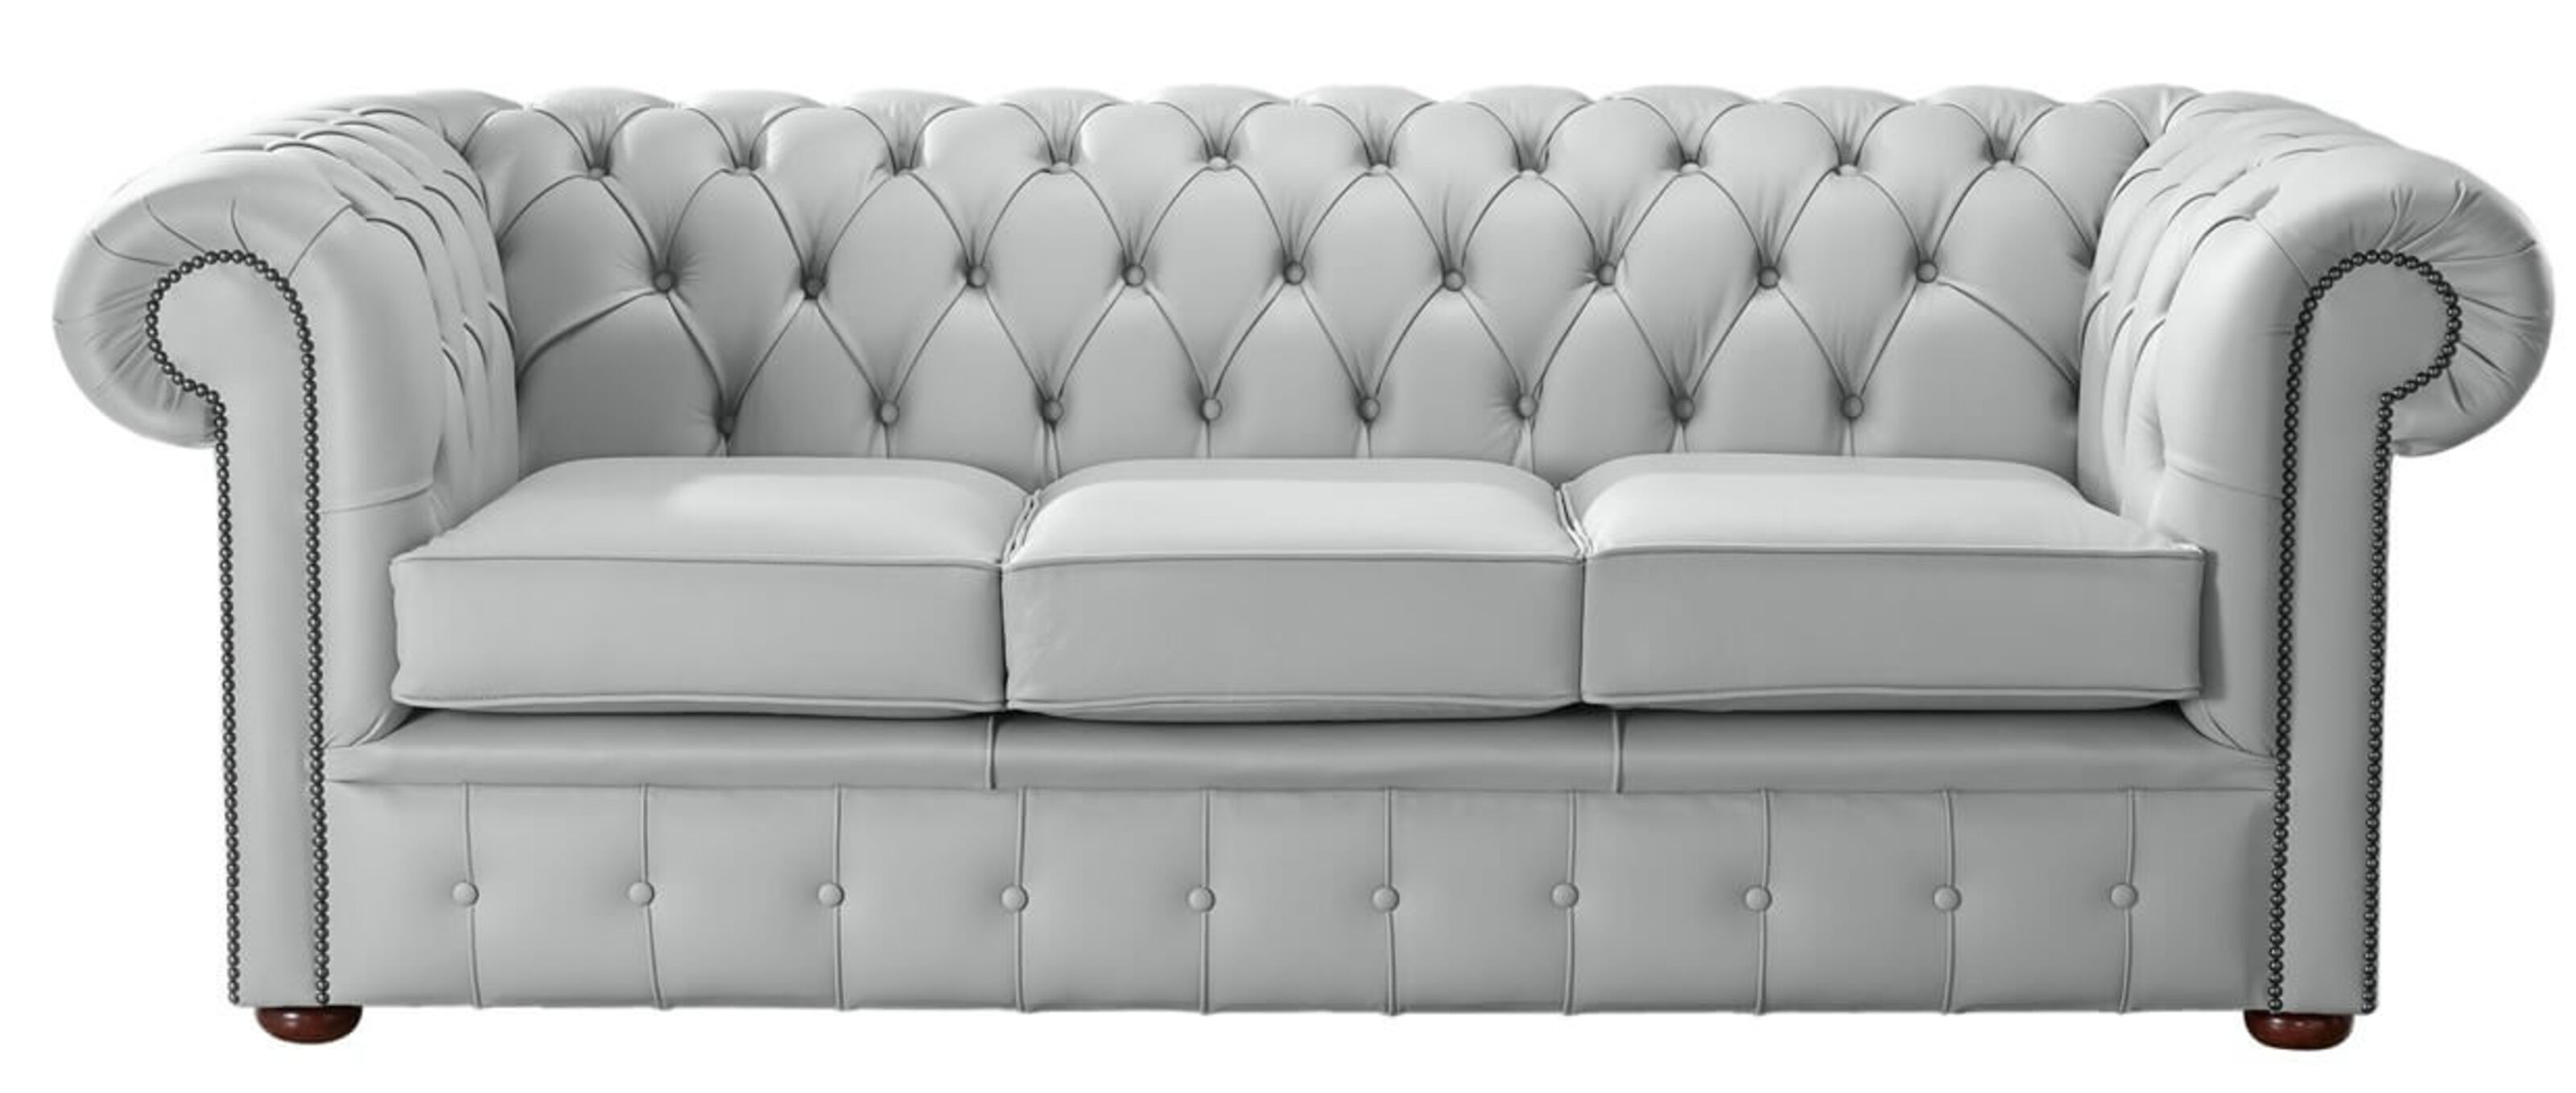 grey leather sofa with silver legs